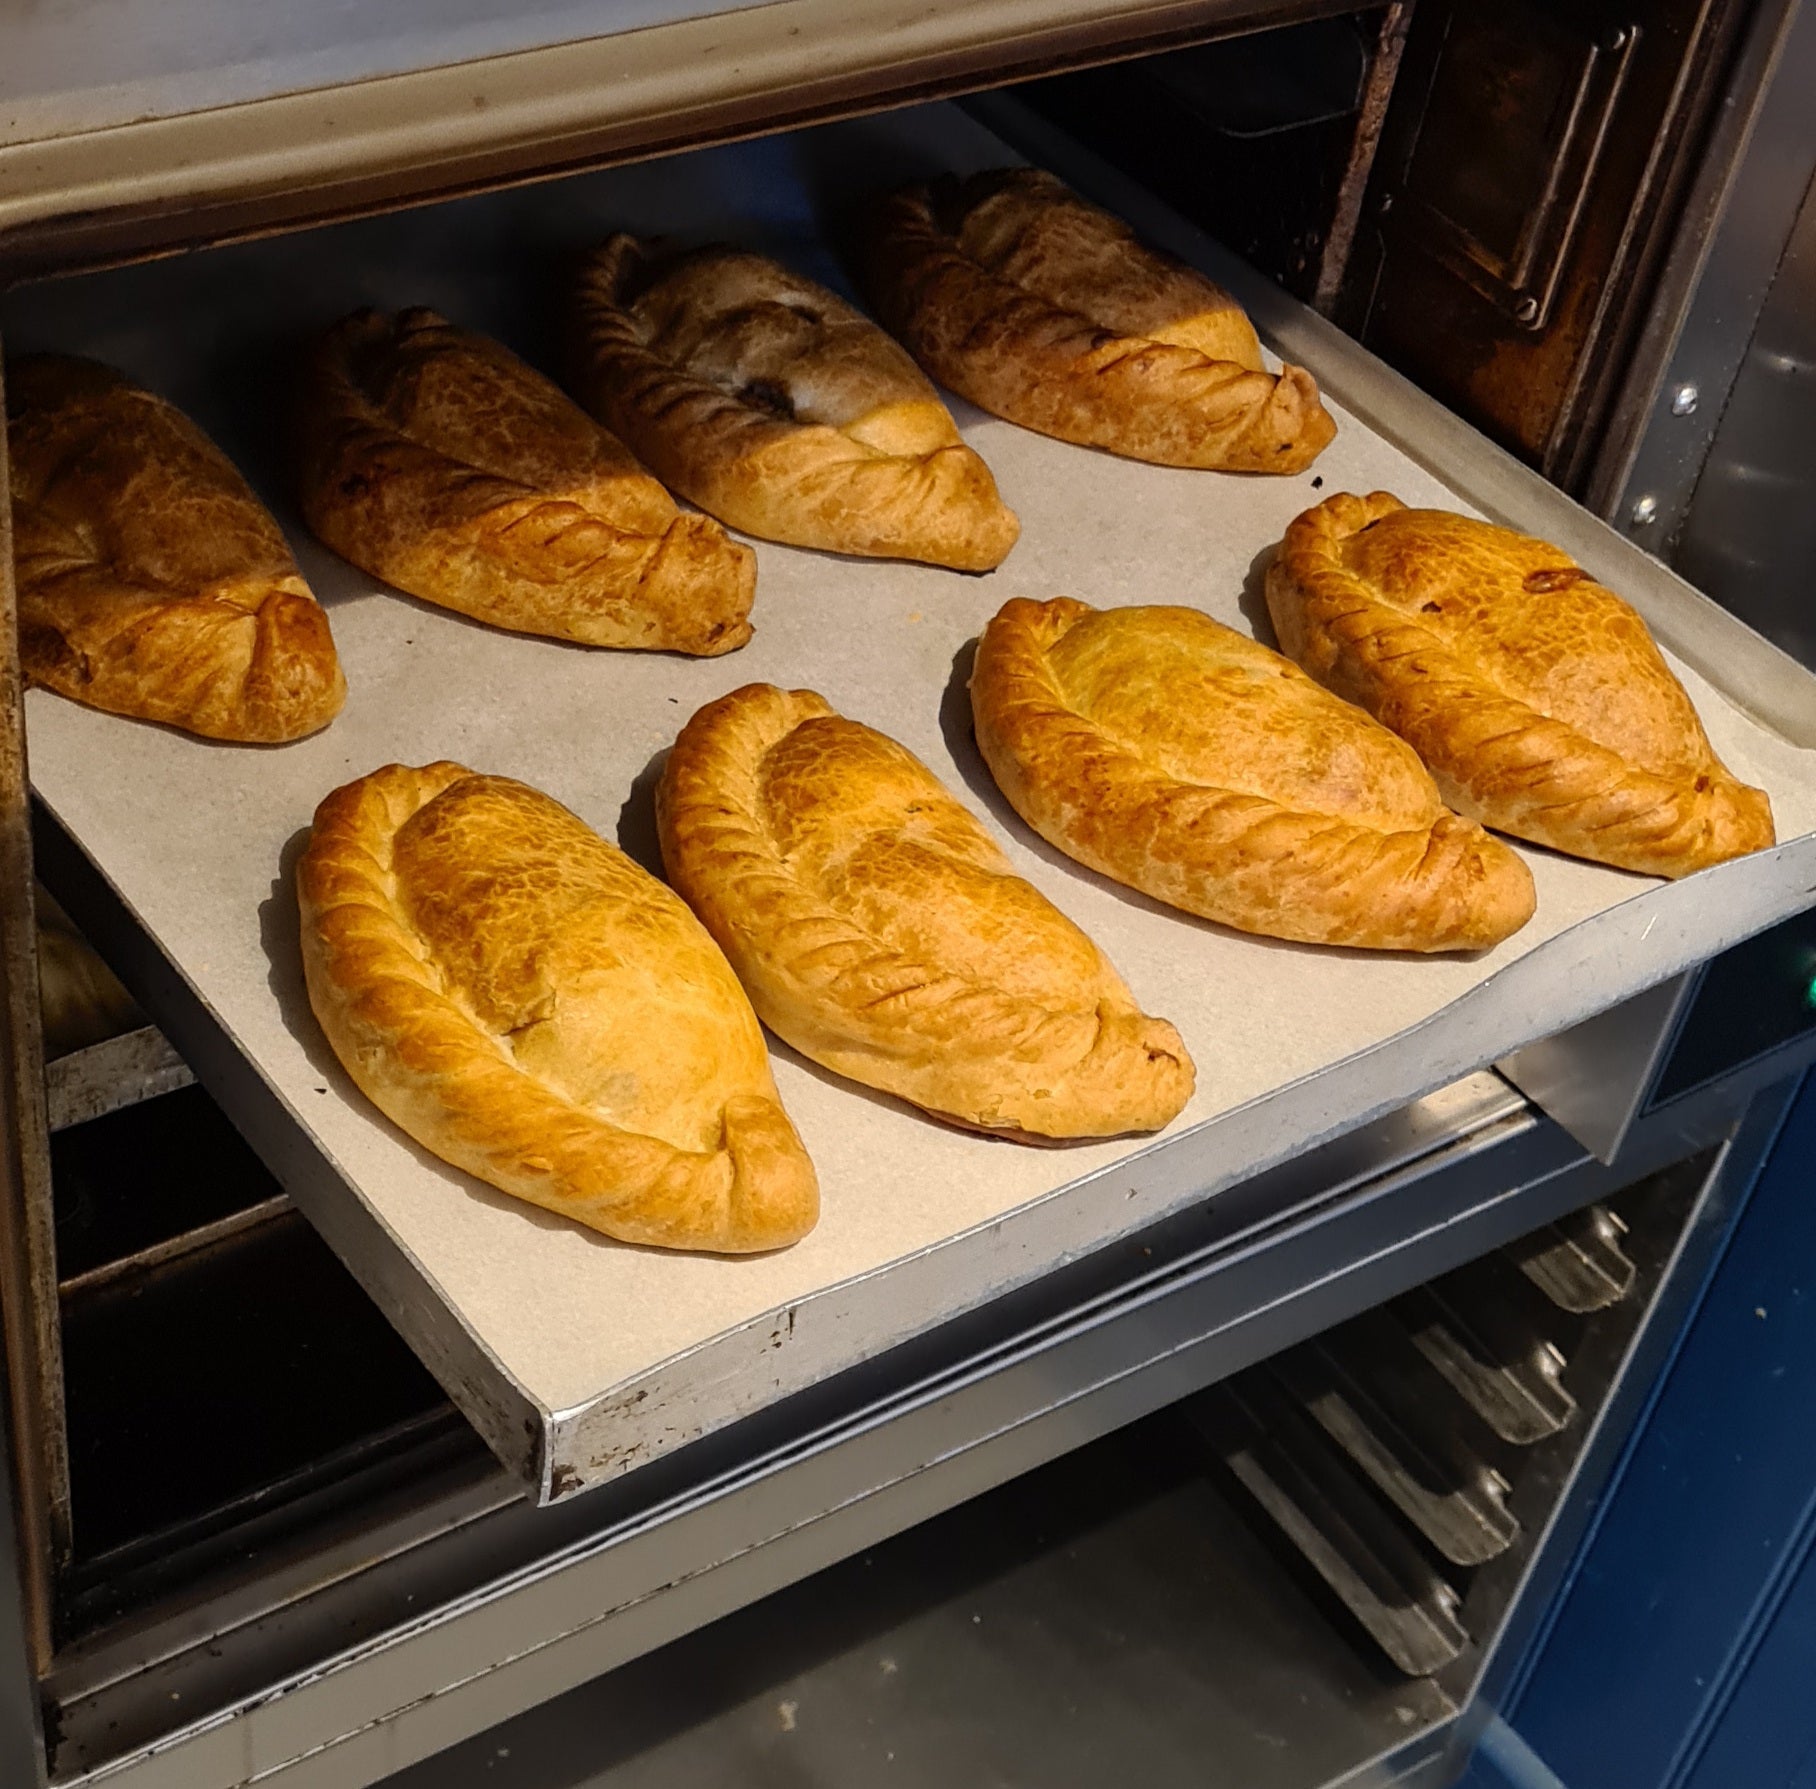 From Cornwall to Your Doorstep: Exploring Pasties by Post